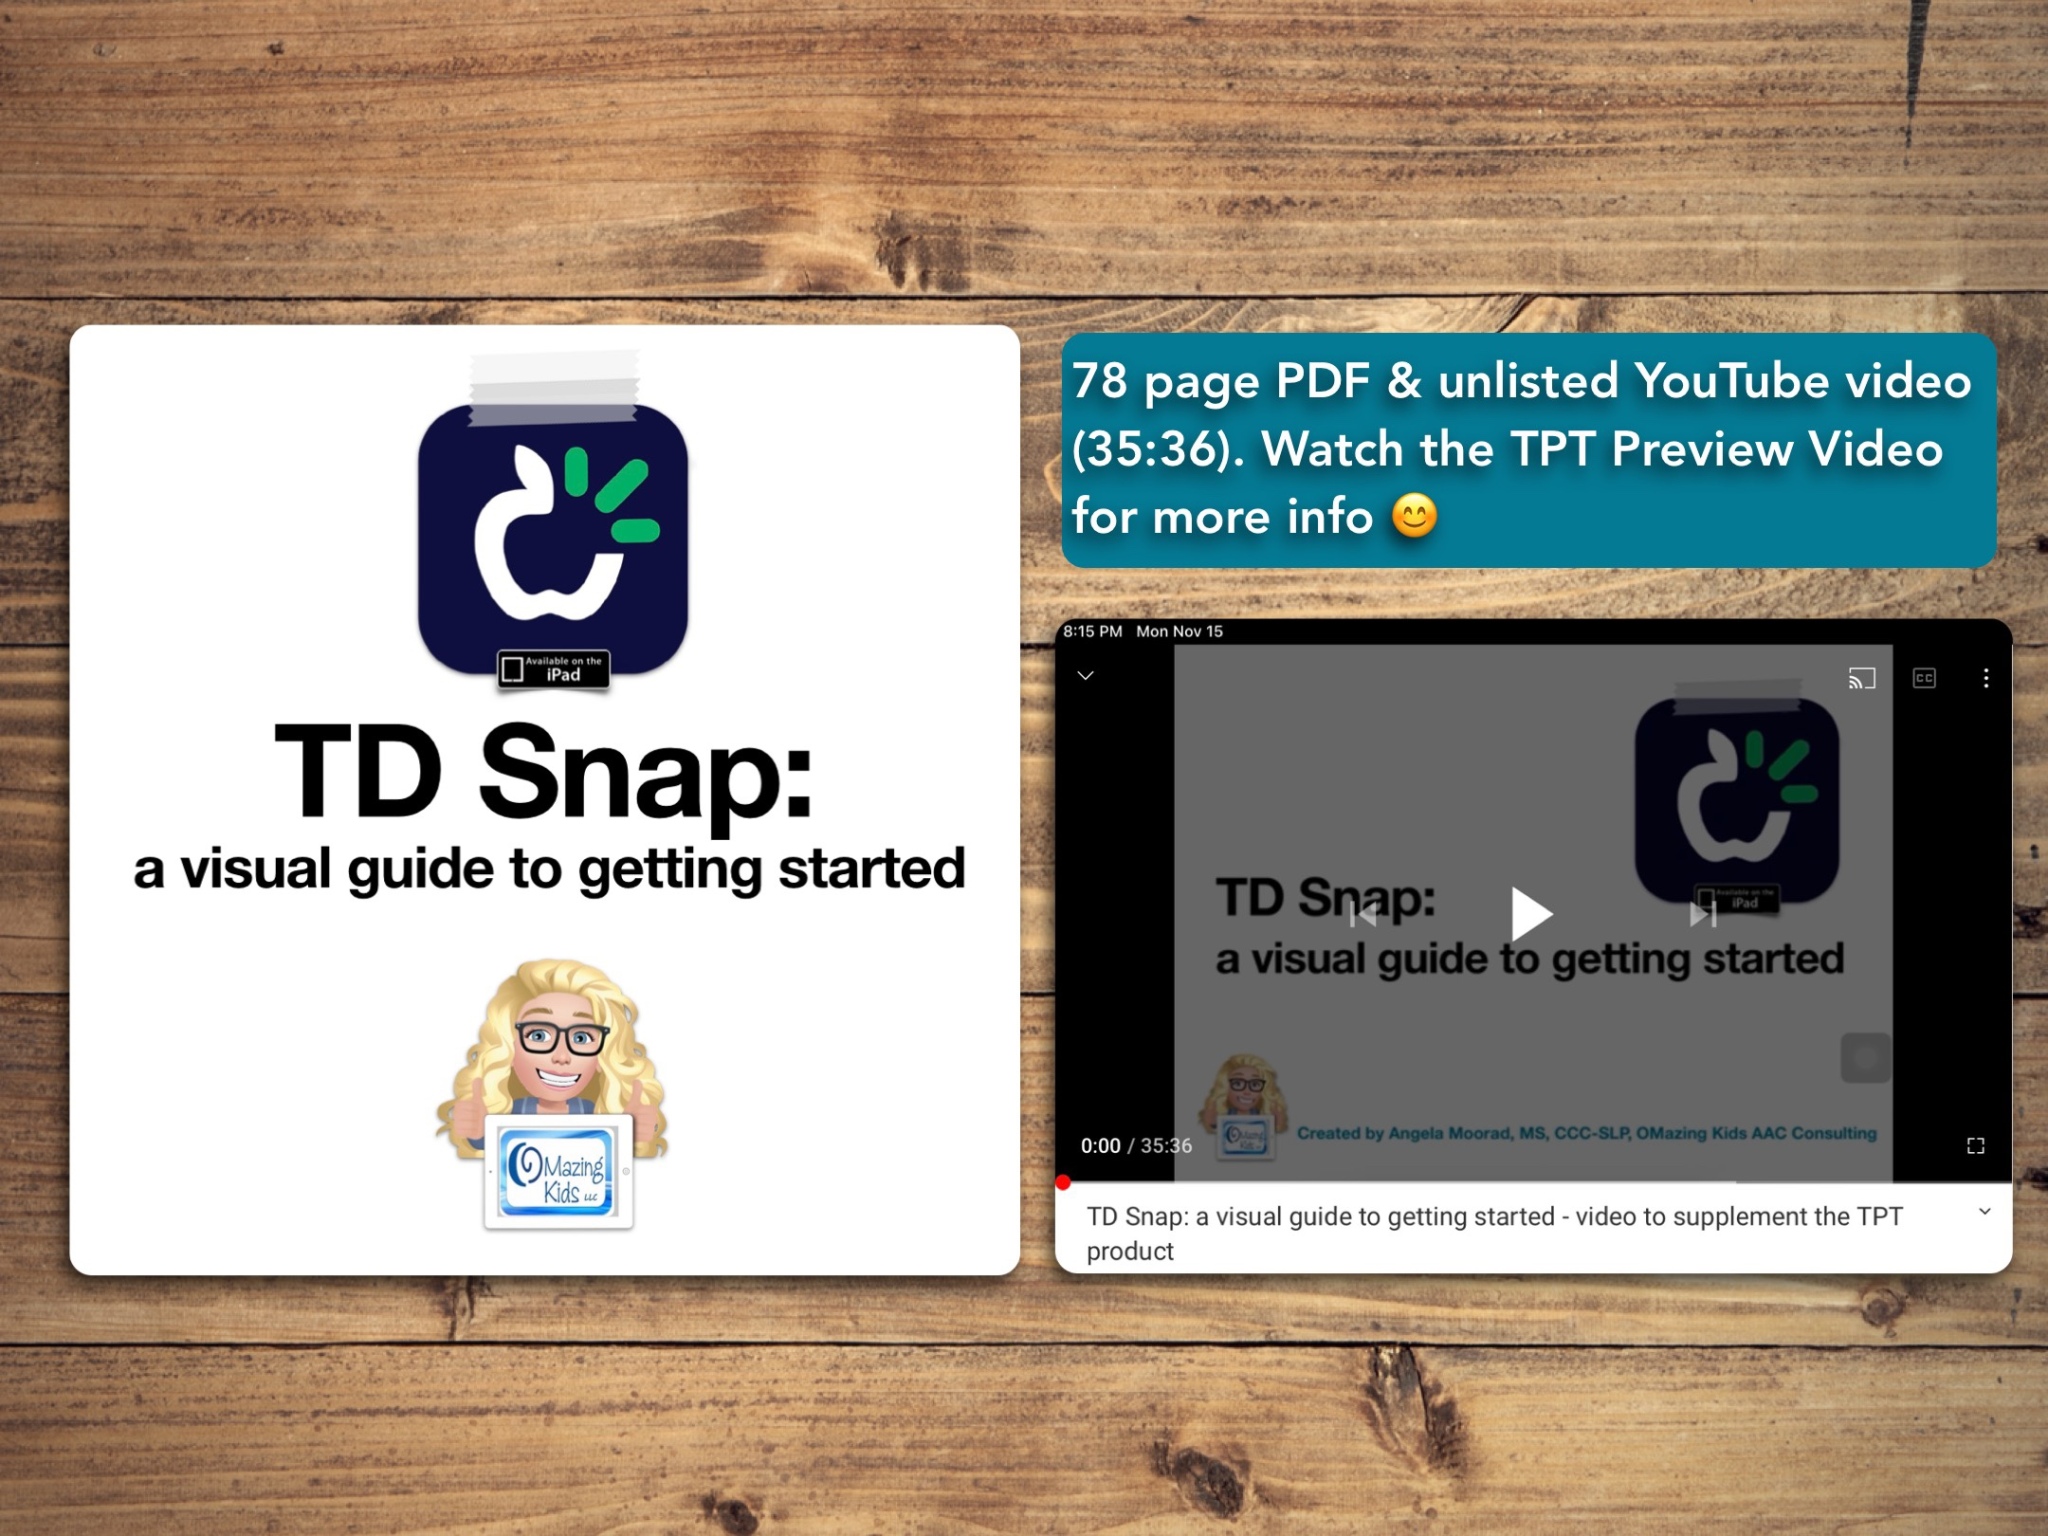 TD Snap: a visual guide to getting started